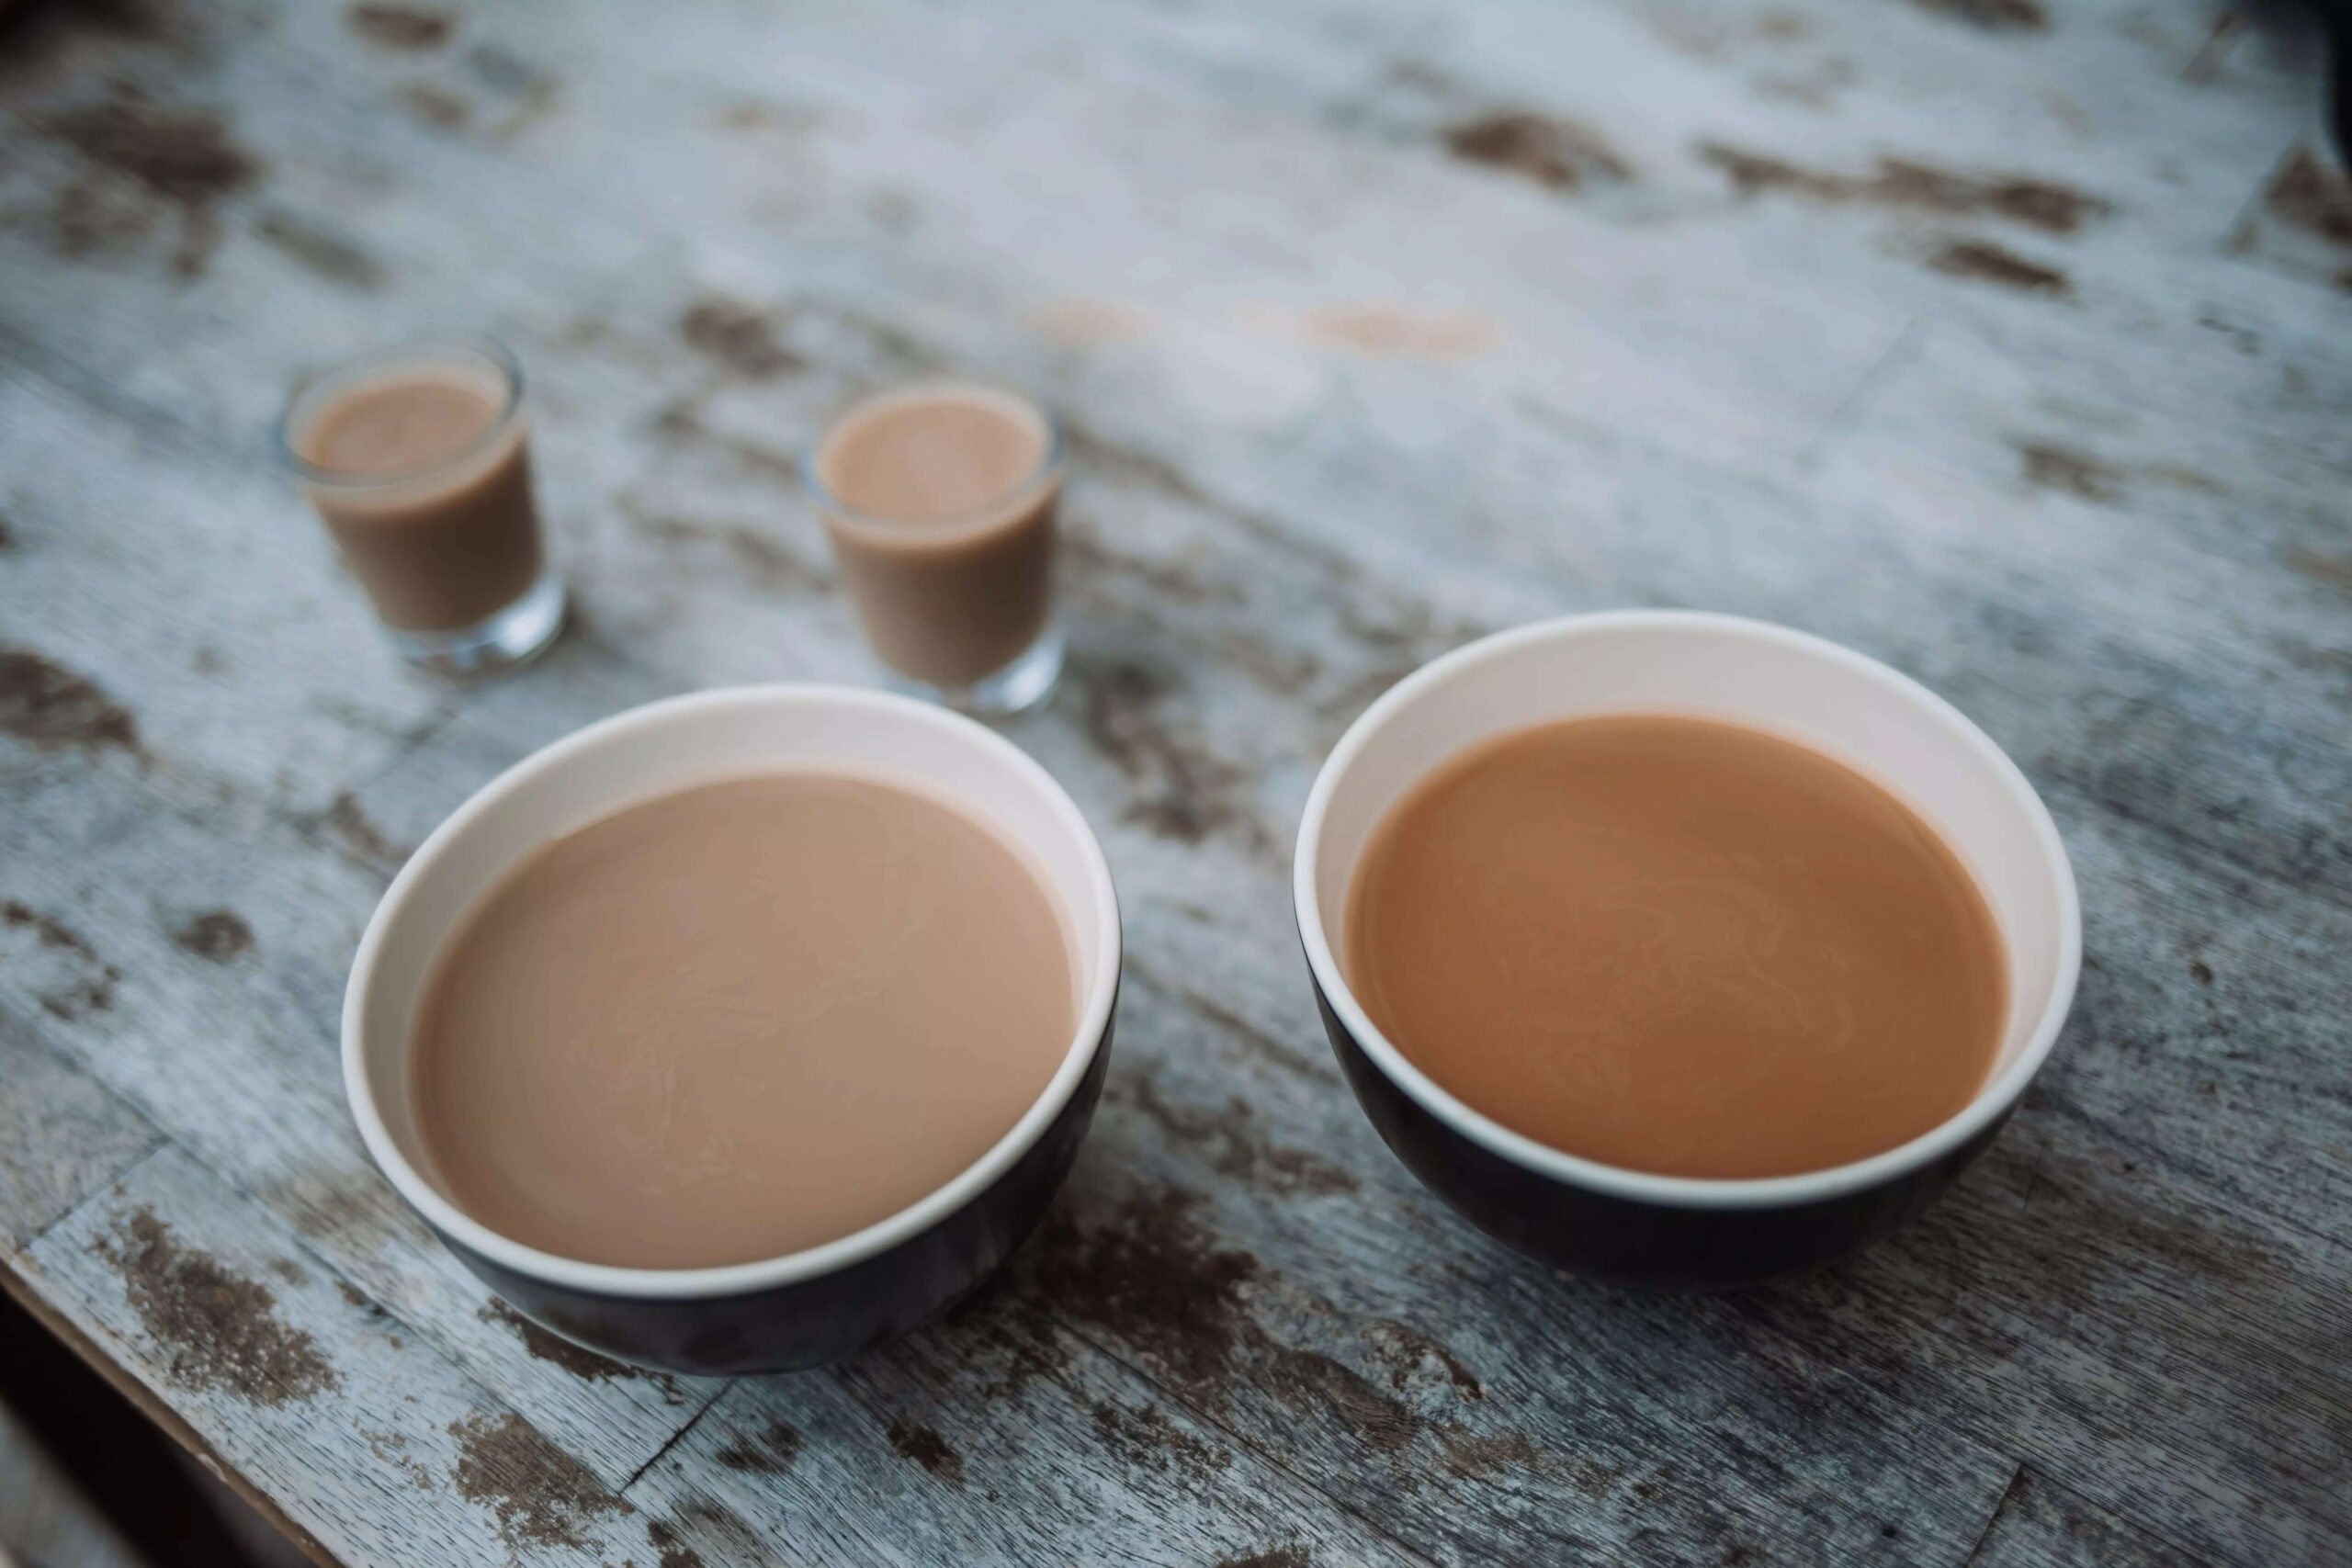 Kava drinks are popular as mood-boosting alternatives to alcohol, but one doctor says they can lead to liver damage.